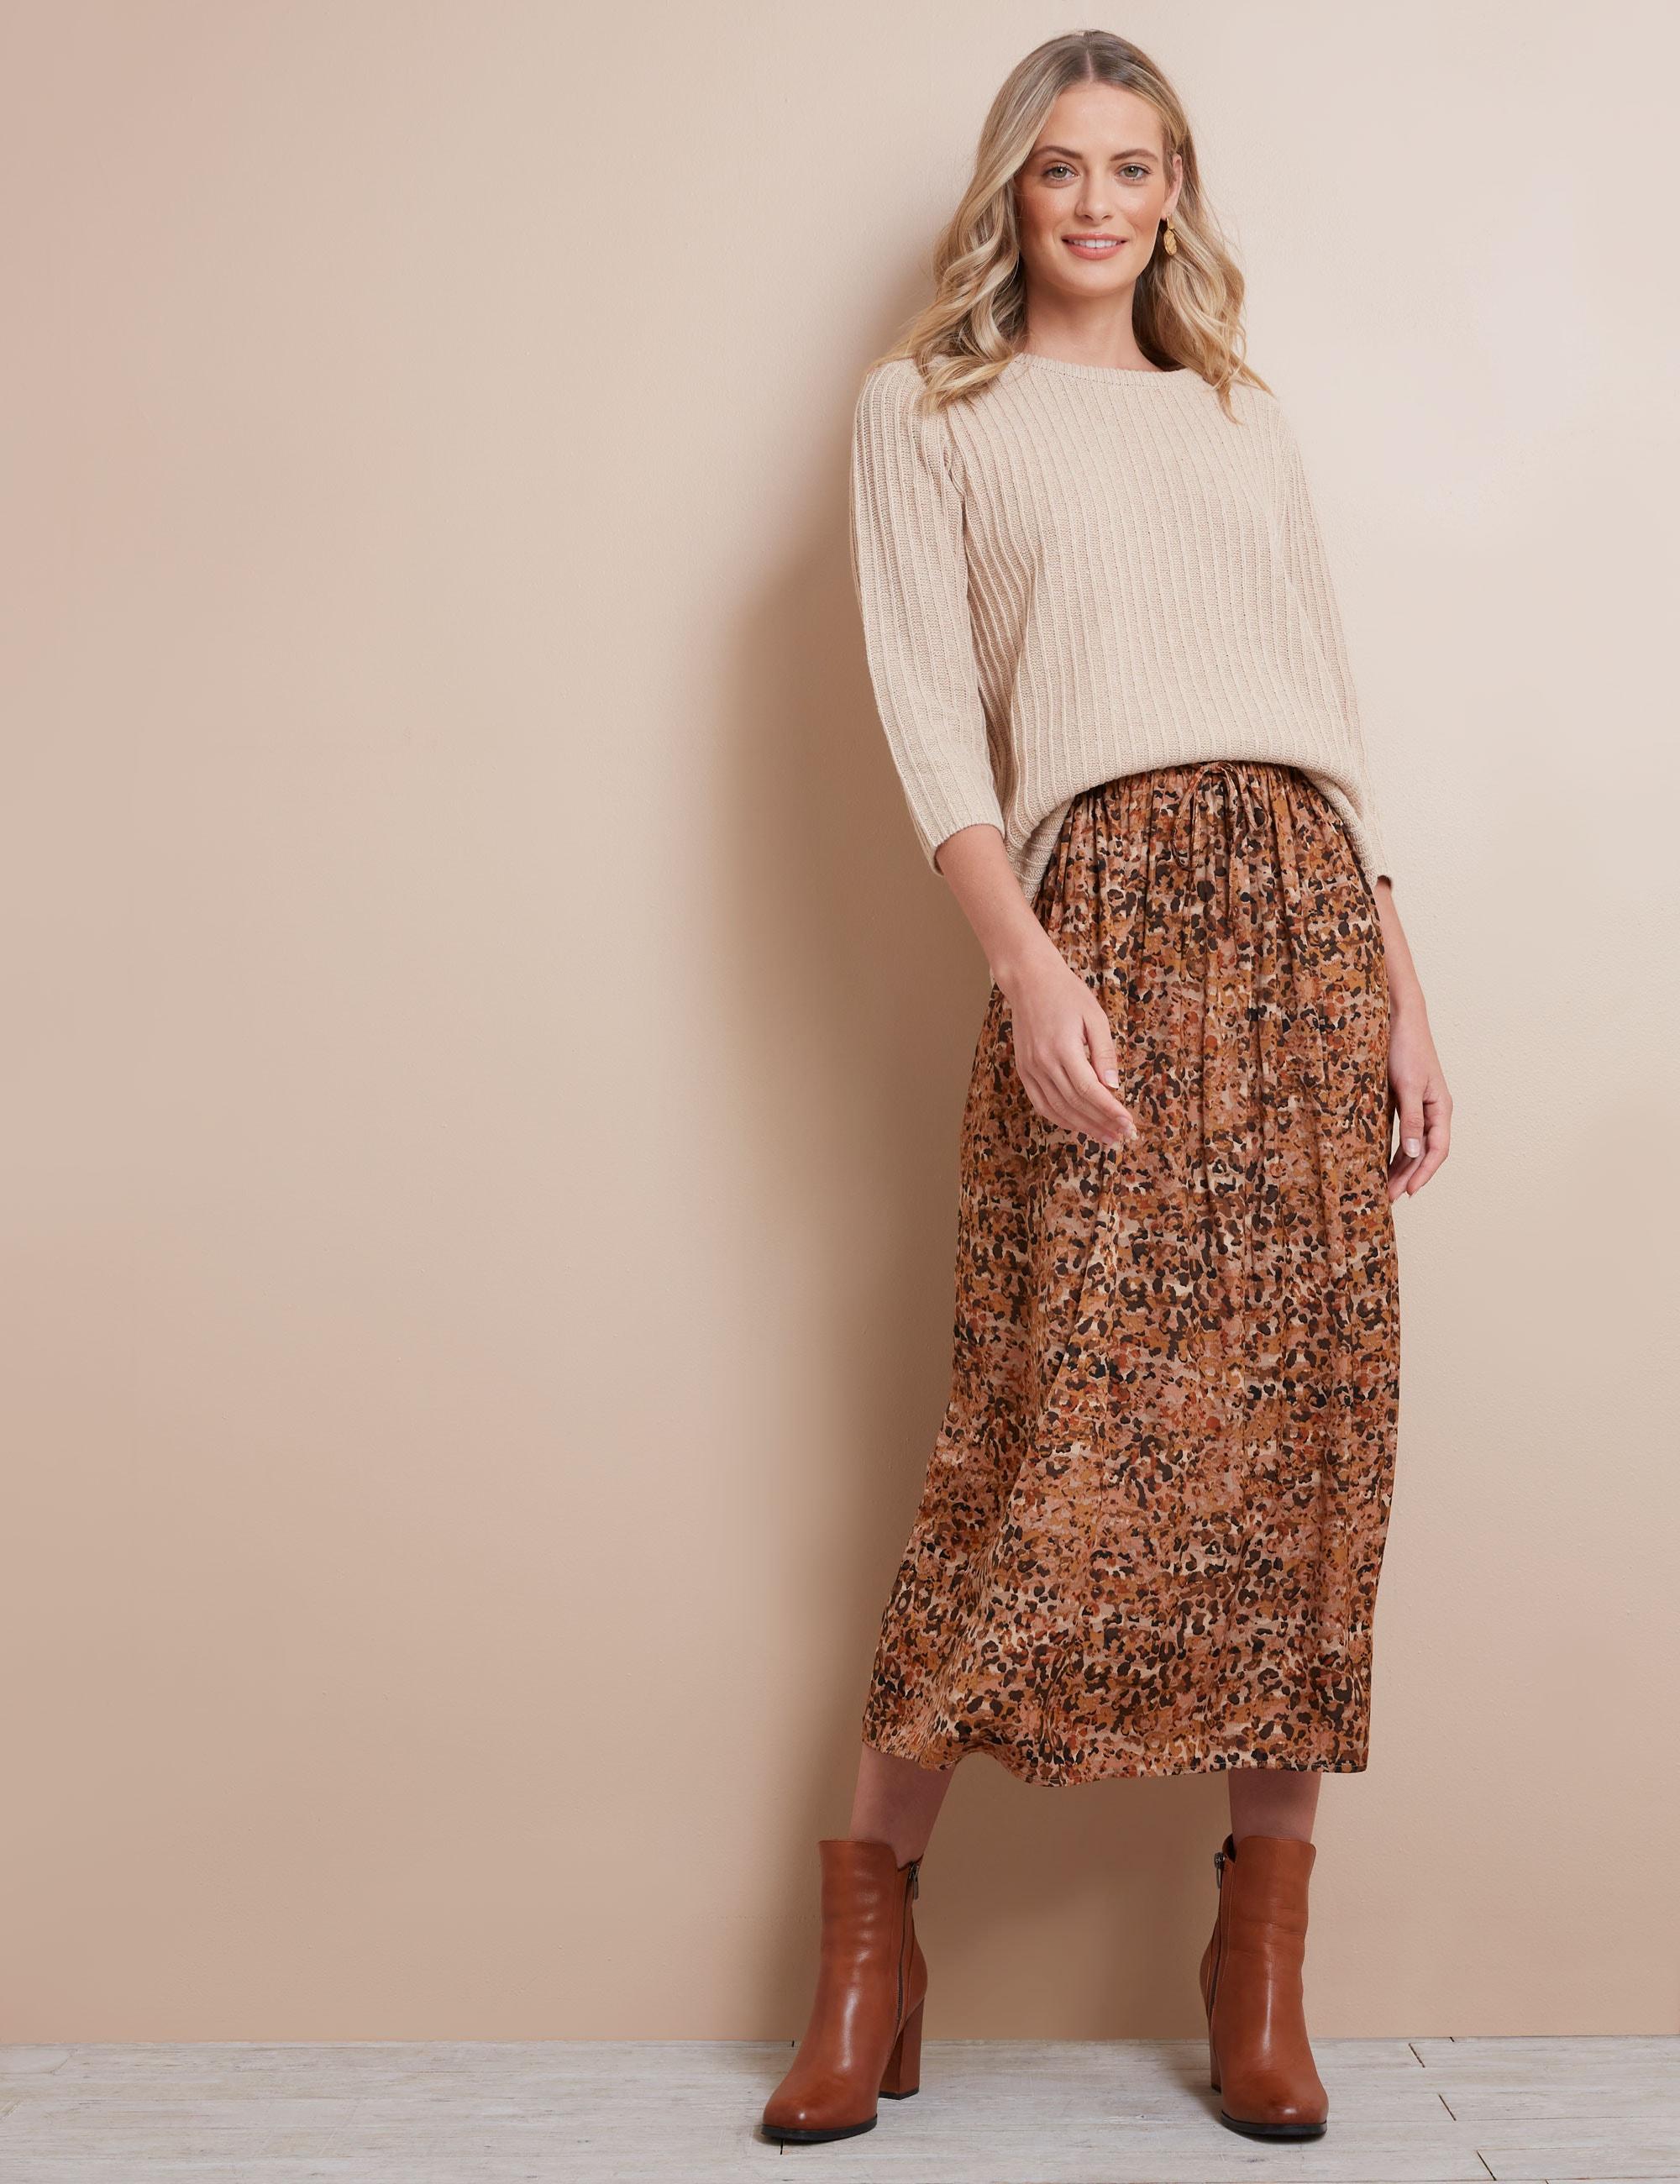 W LANE - Womens Skirts - Maxi - Winter - Brown - Animal - Straight - Fashion - Leopard - Relaxed Fit - Long - Casual Work Clothes - Office Wear